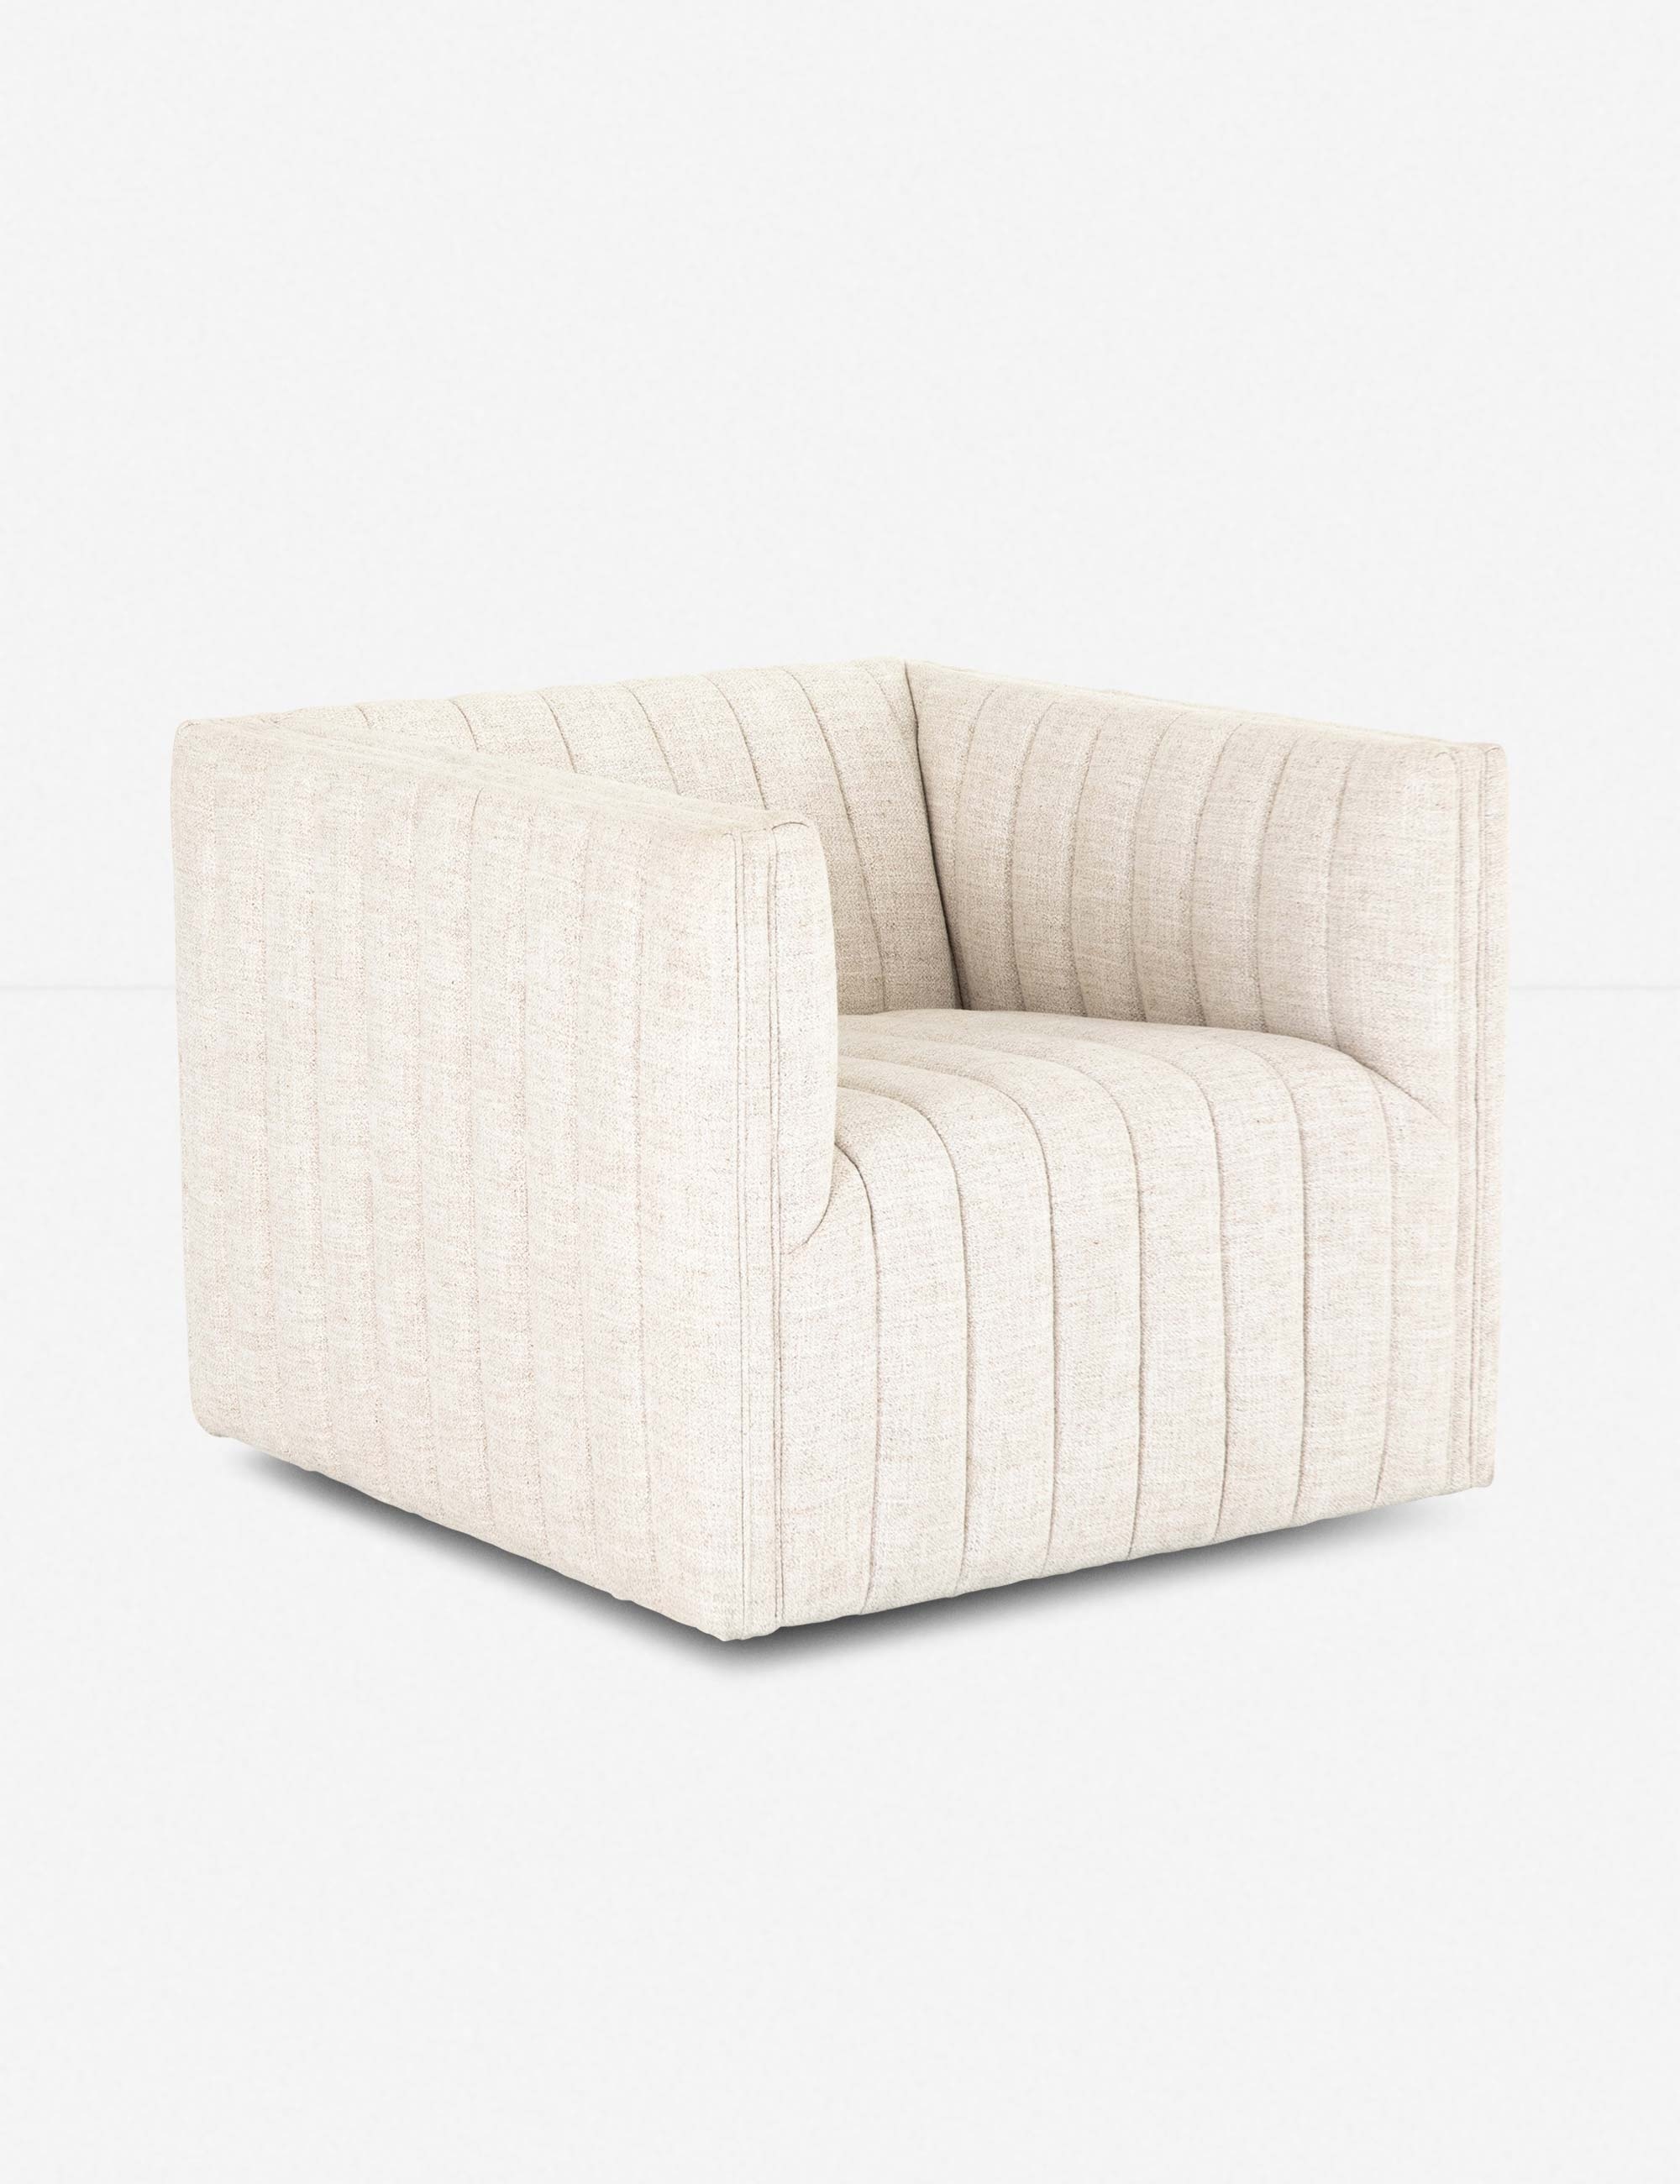 Roz Swivel Chair, Dover Crescent - Image 1